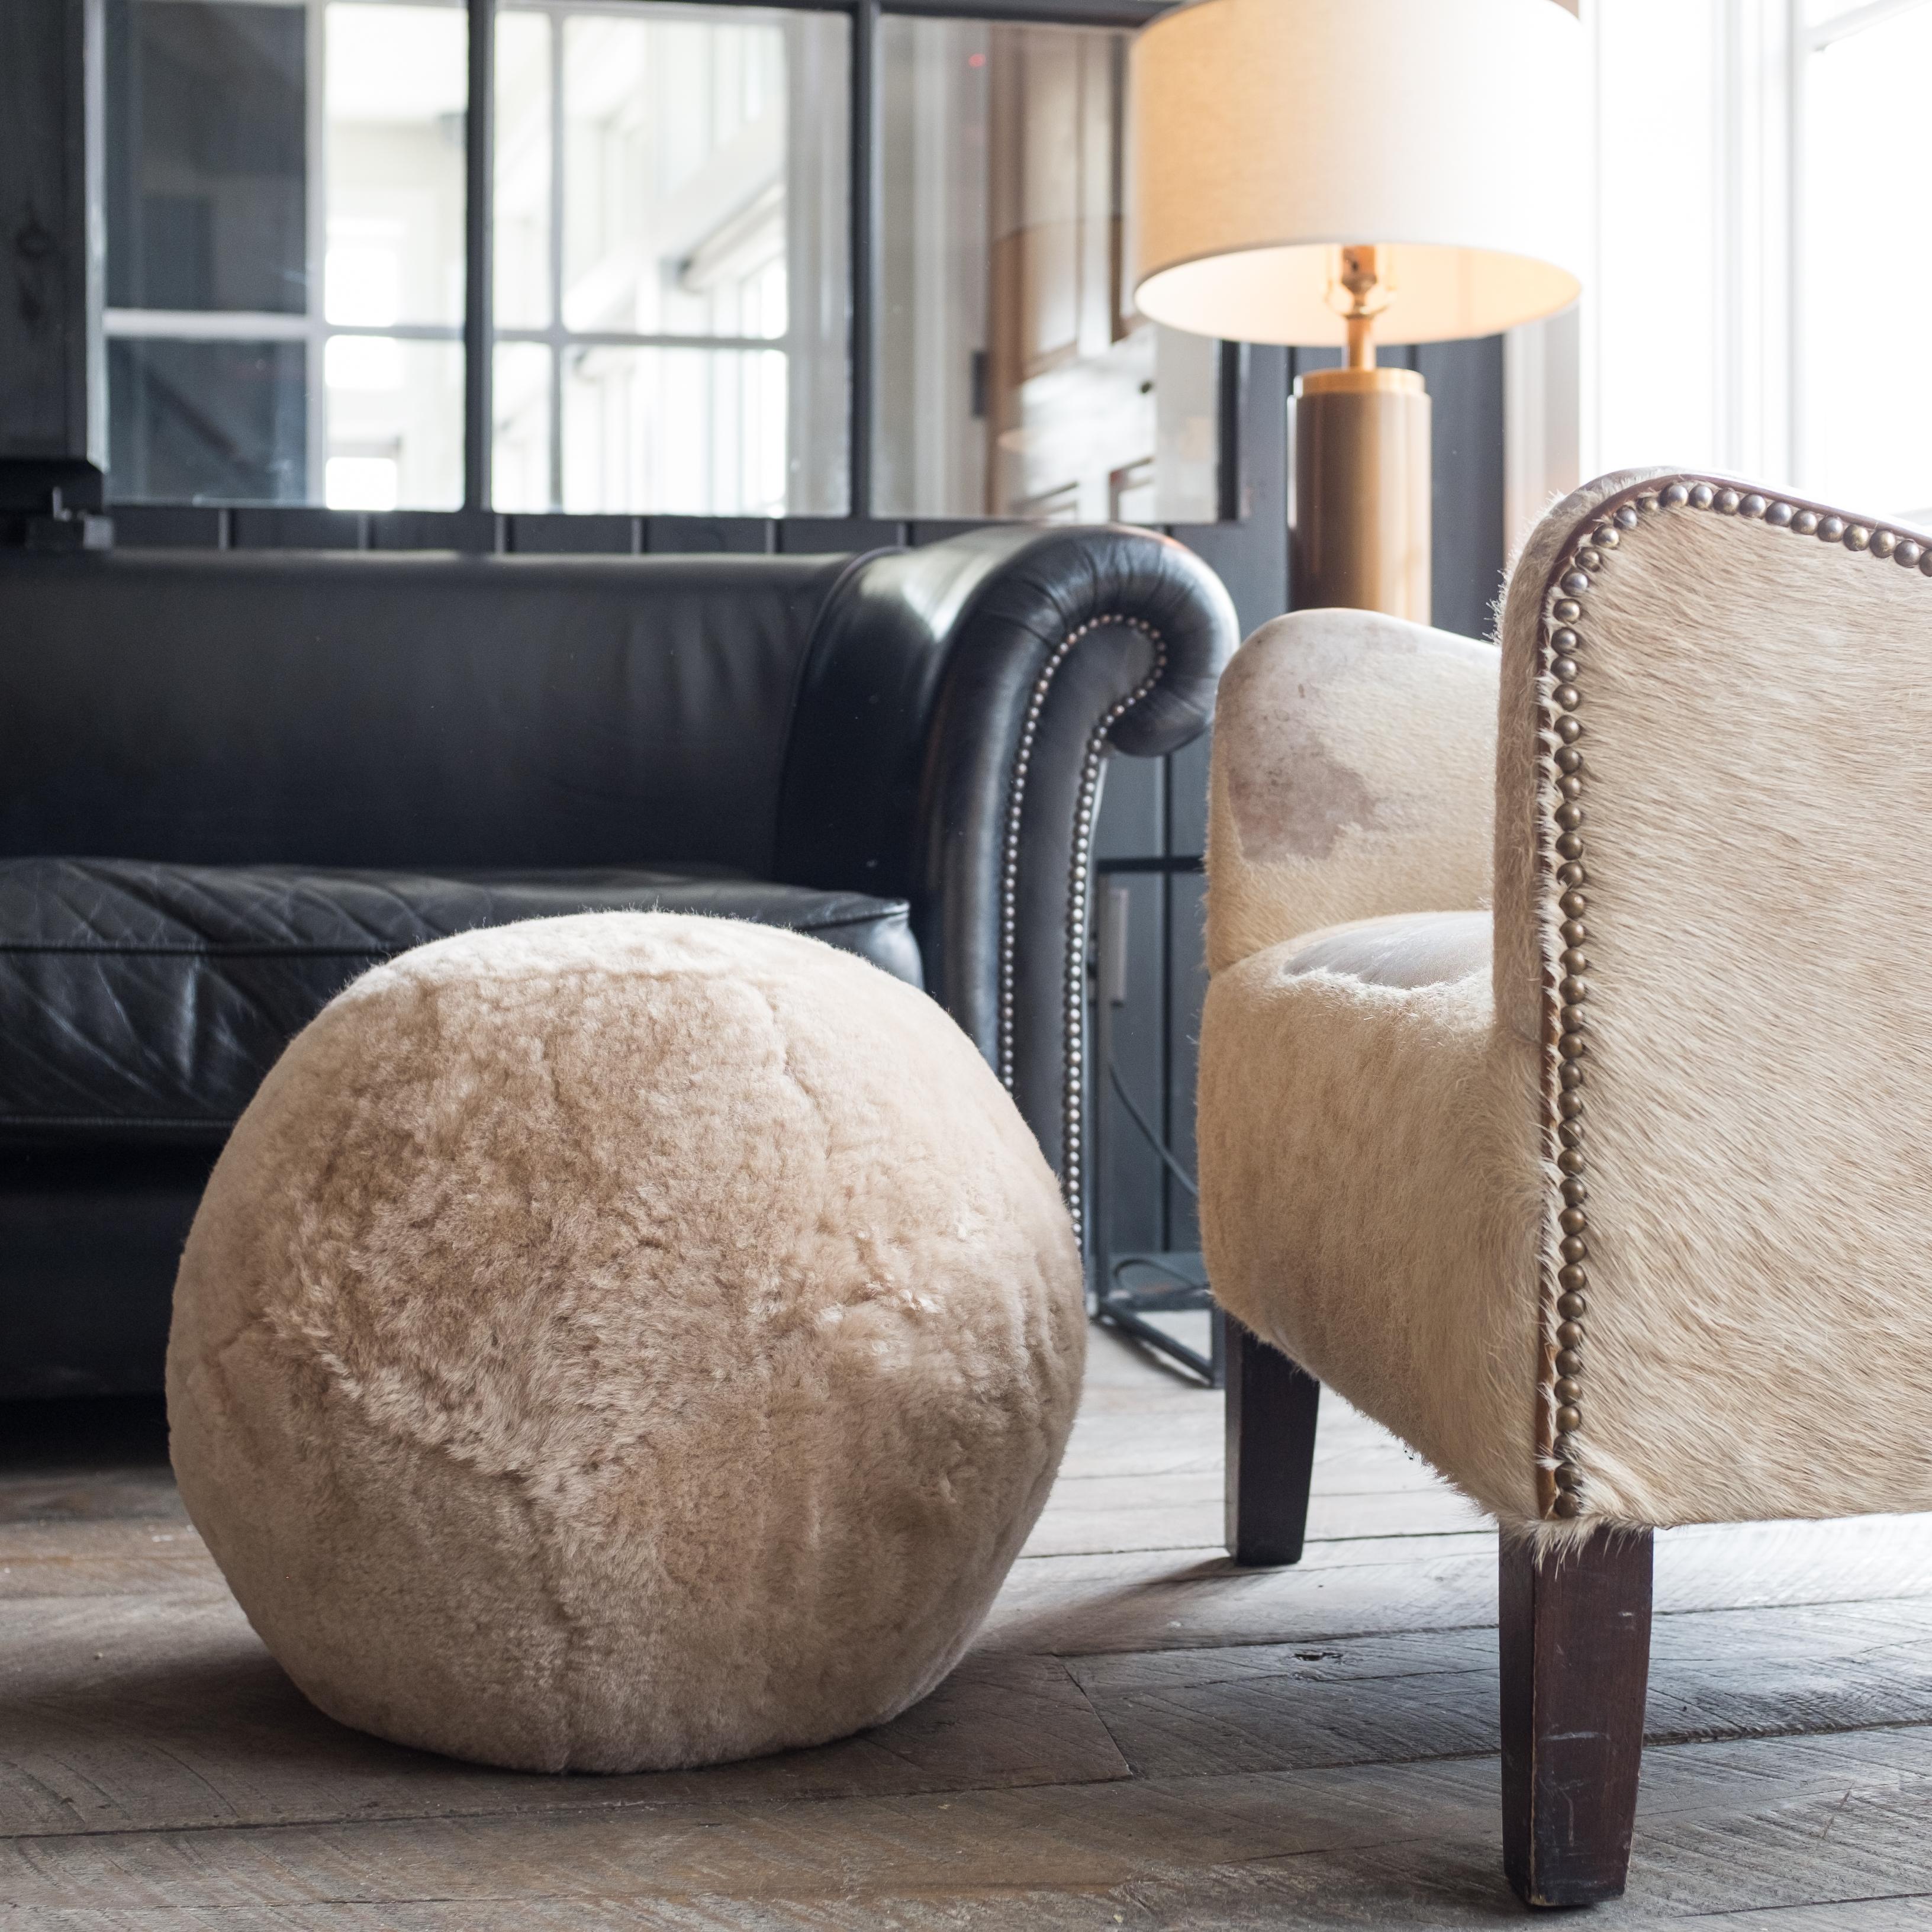 Featured with Camel color sheepskin, the Ottoman X is inspired by fundamental geometry. These structured and supportive round ball ottomans are designed to function as a traditional leg rest, add a twist to secondary living room seating, or as